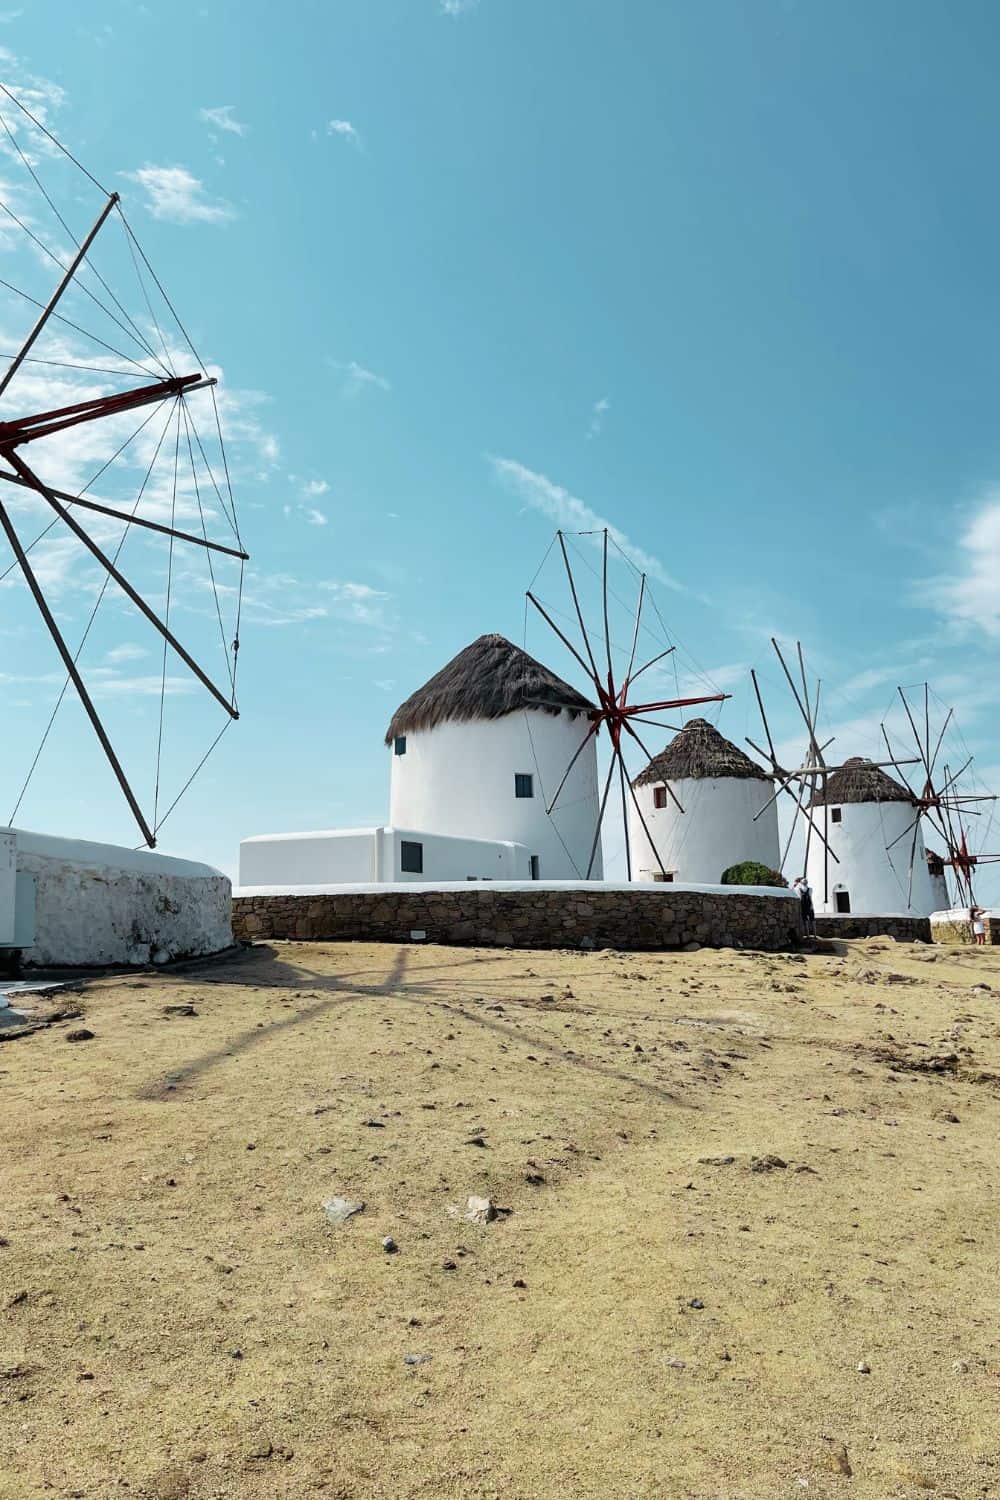 Iconic windmills of Mykonos against a clear blue sky. The foreground shows a barren landscape leading up to the famous white structures with thatched roofs and red-tipped wooden blades, characteristic of this Greek island.